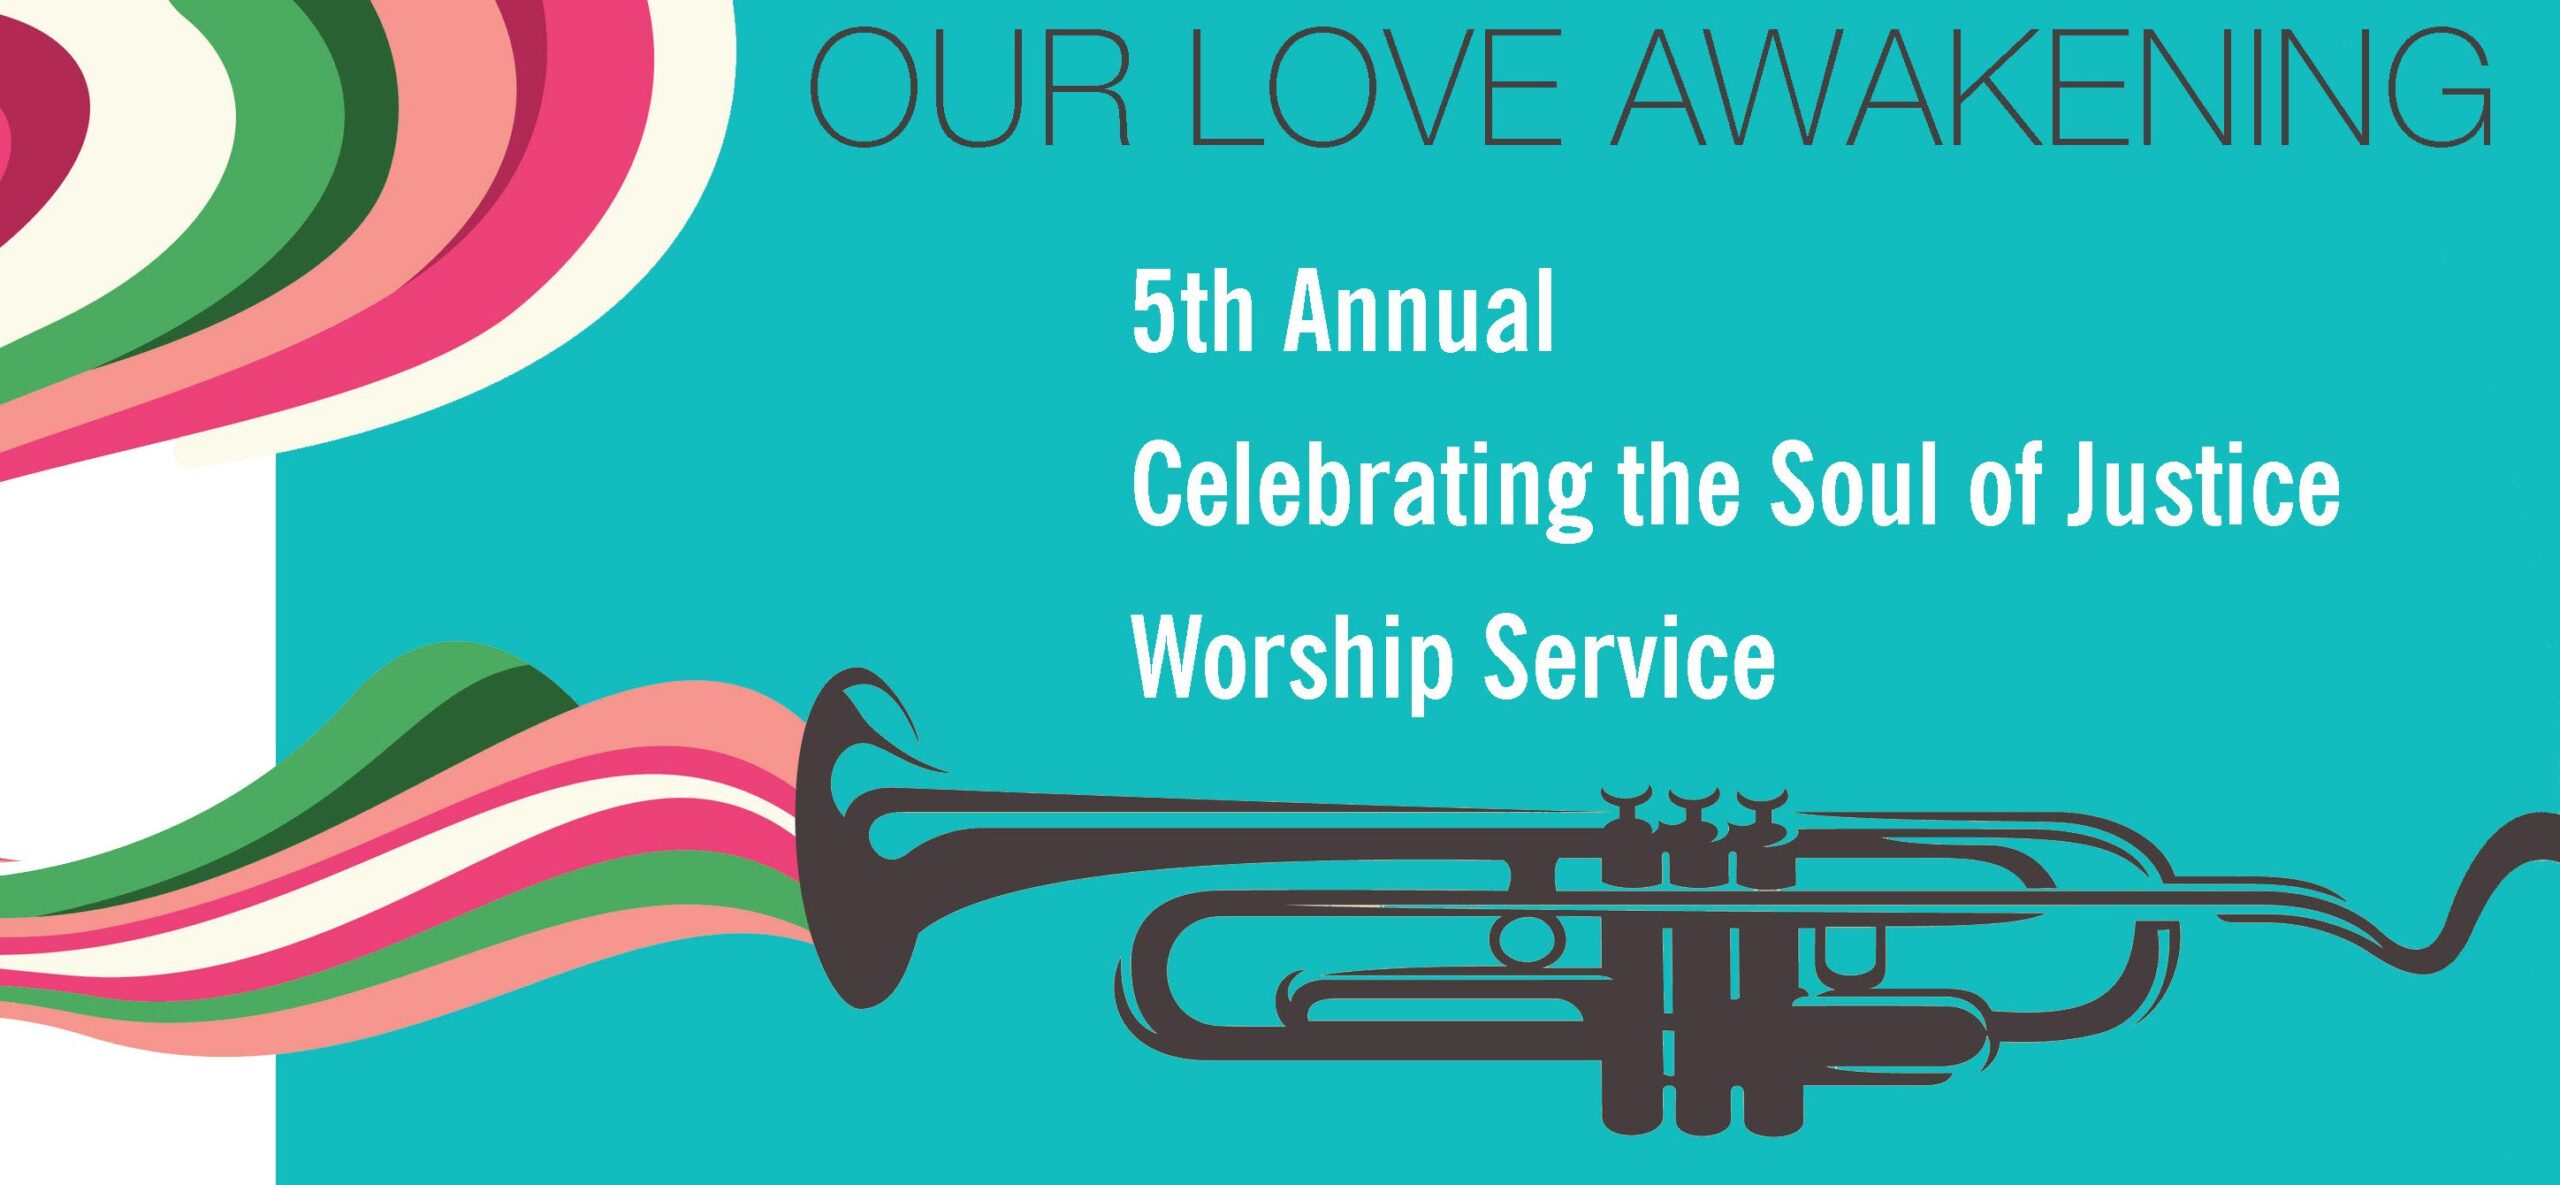 Our Love Awakening: Celebrating the Soul of Justice 2017